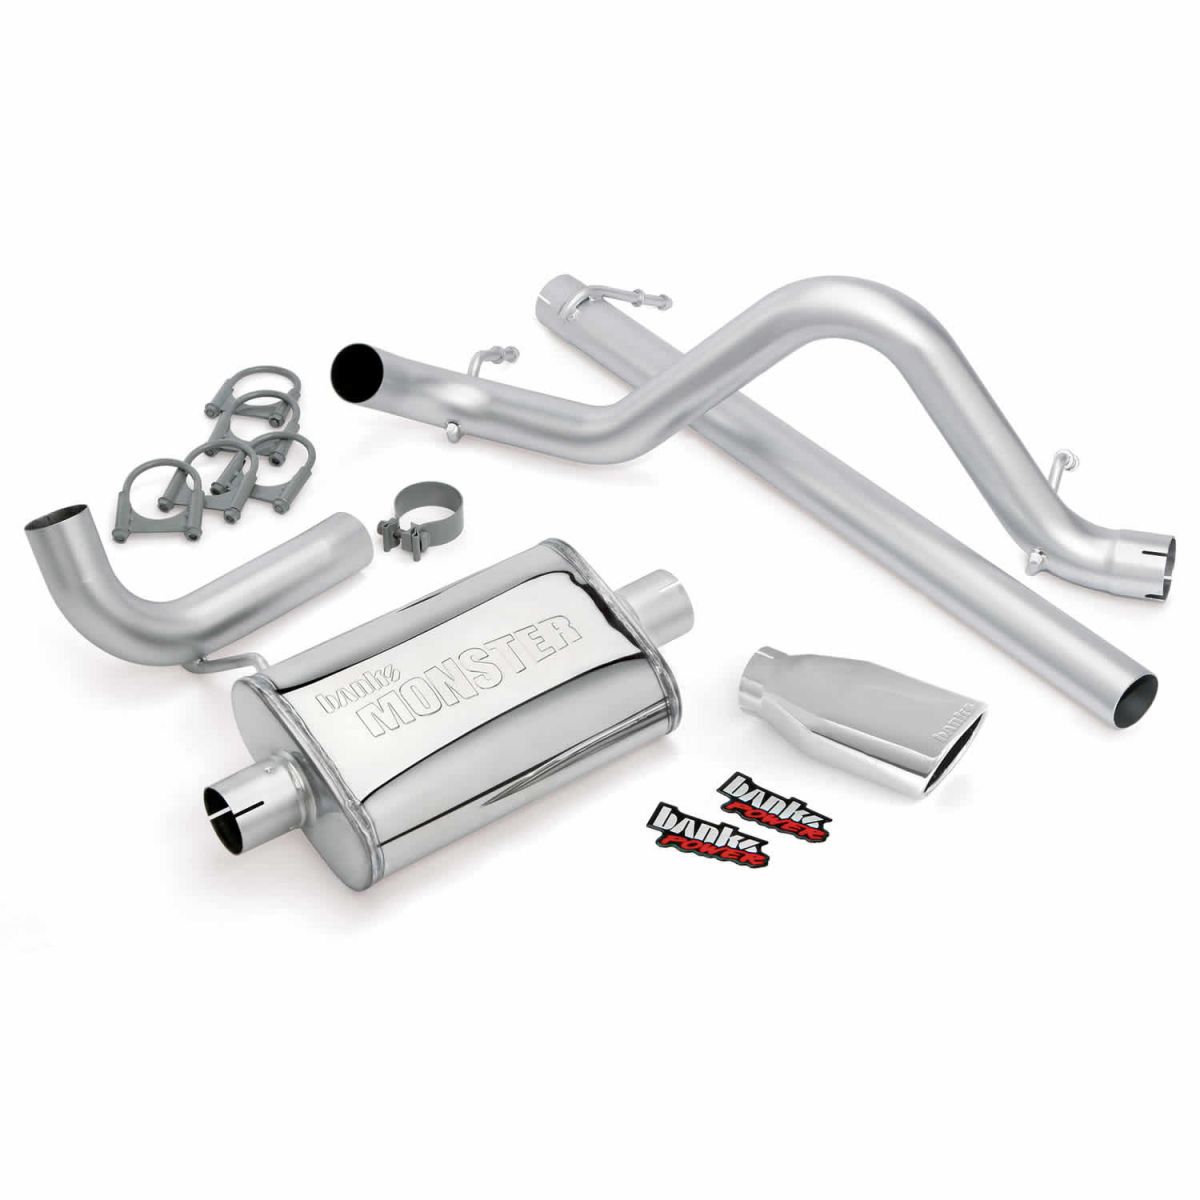 Banks Power - Banks Power Monster Exhaust System Single Exit Chrome Ob Round Tip 07-11 Jeep 3.8L Wrangler 2 Door